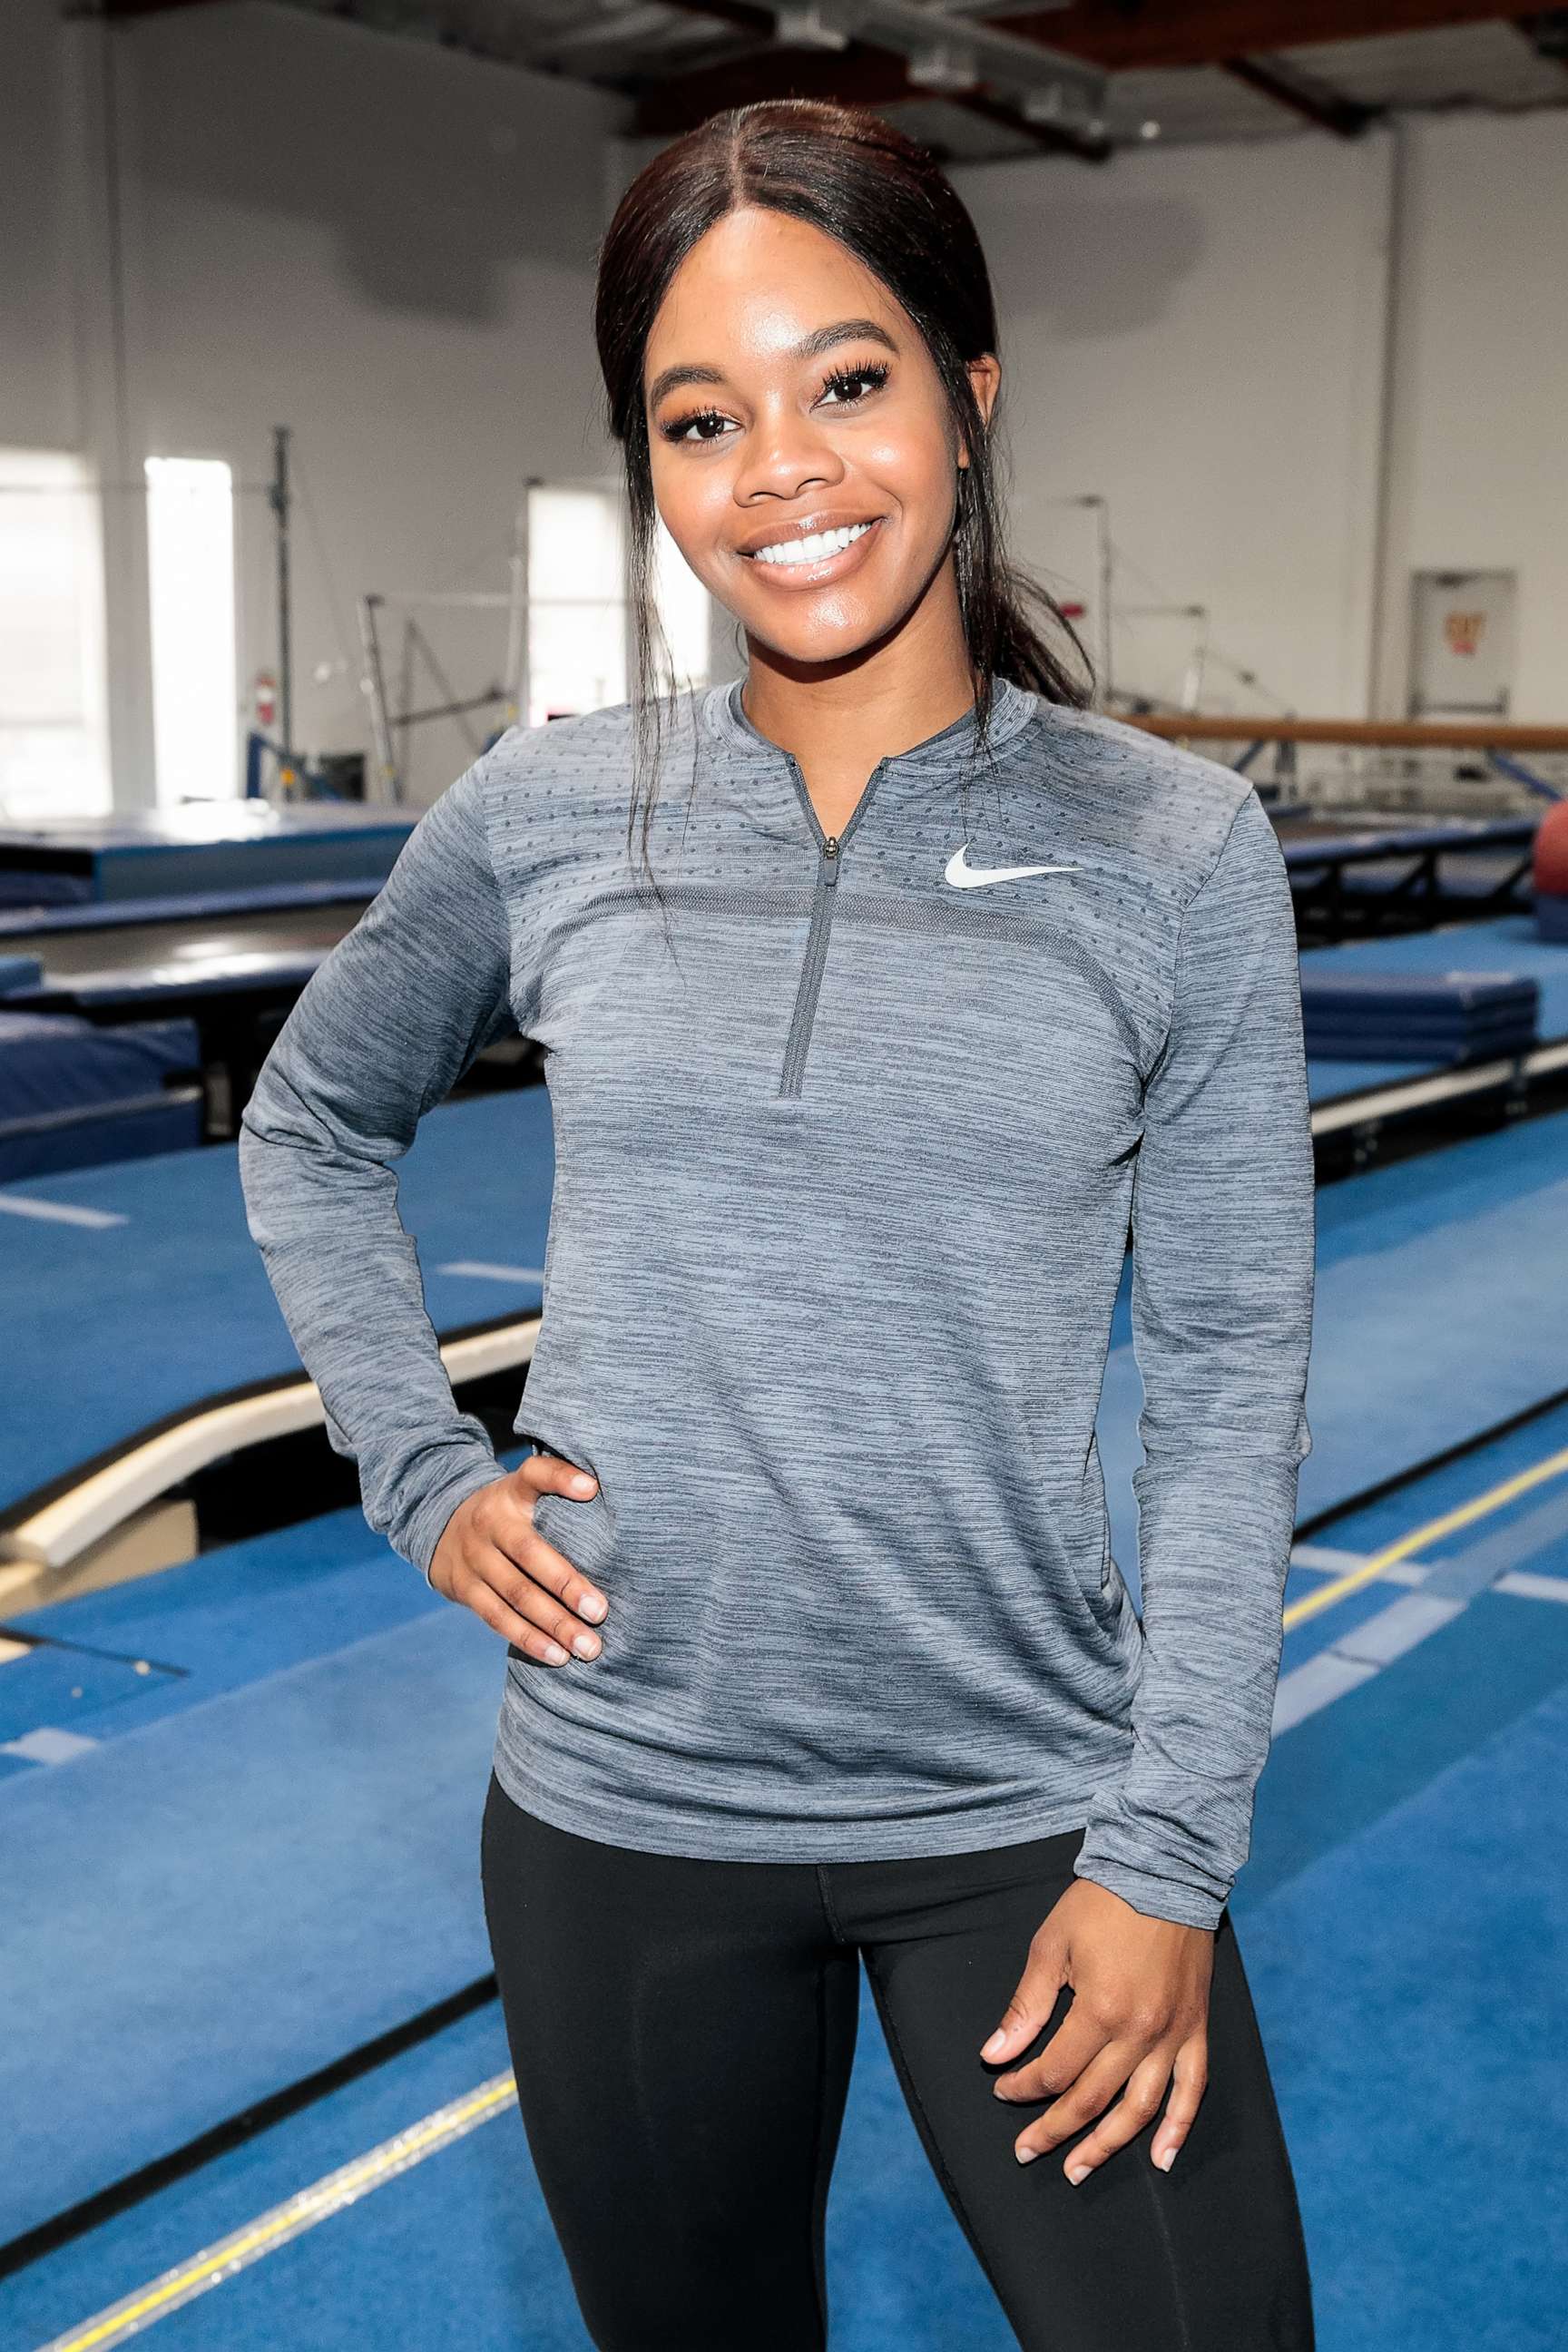 PHOTO: In this March 10, 2020, file photo, Olympic gymnast Gabby Douglas is shown in Los Angeles.